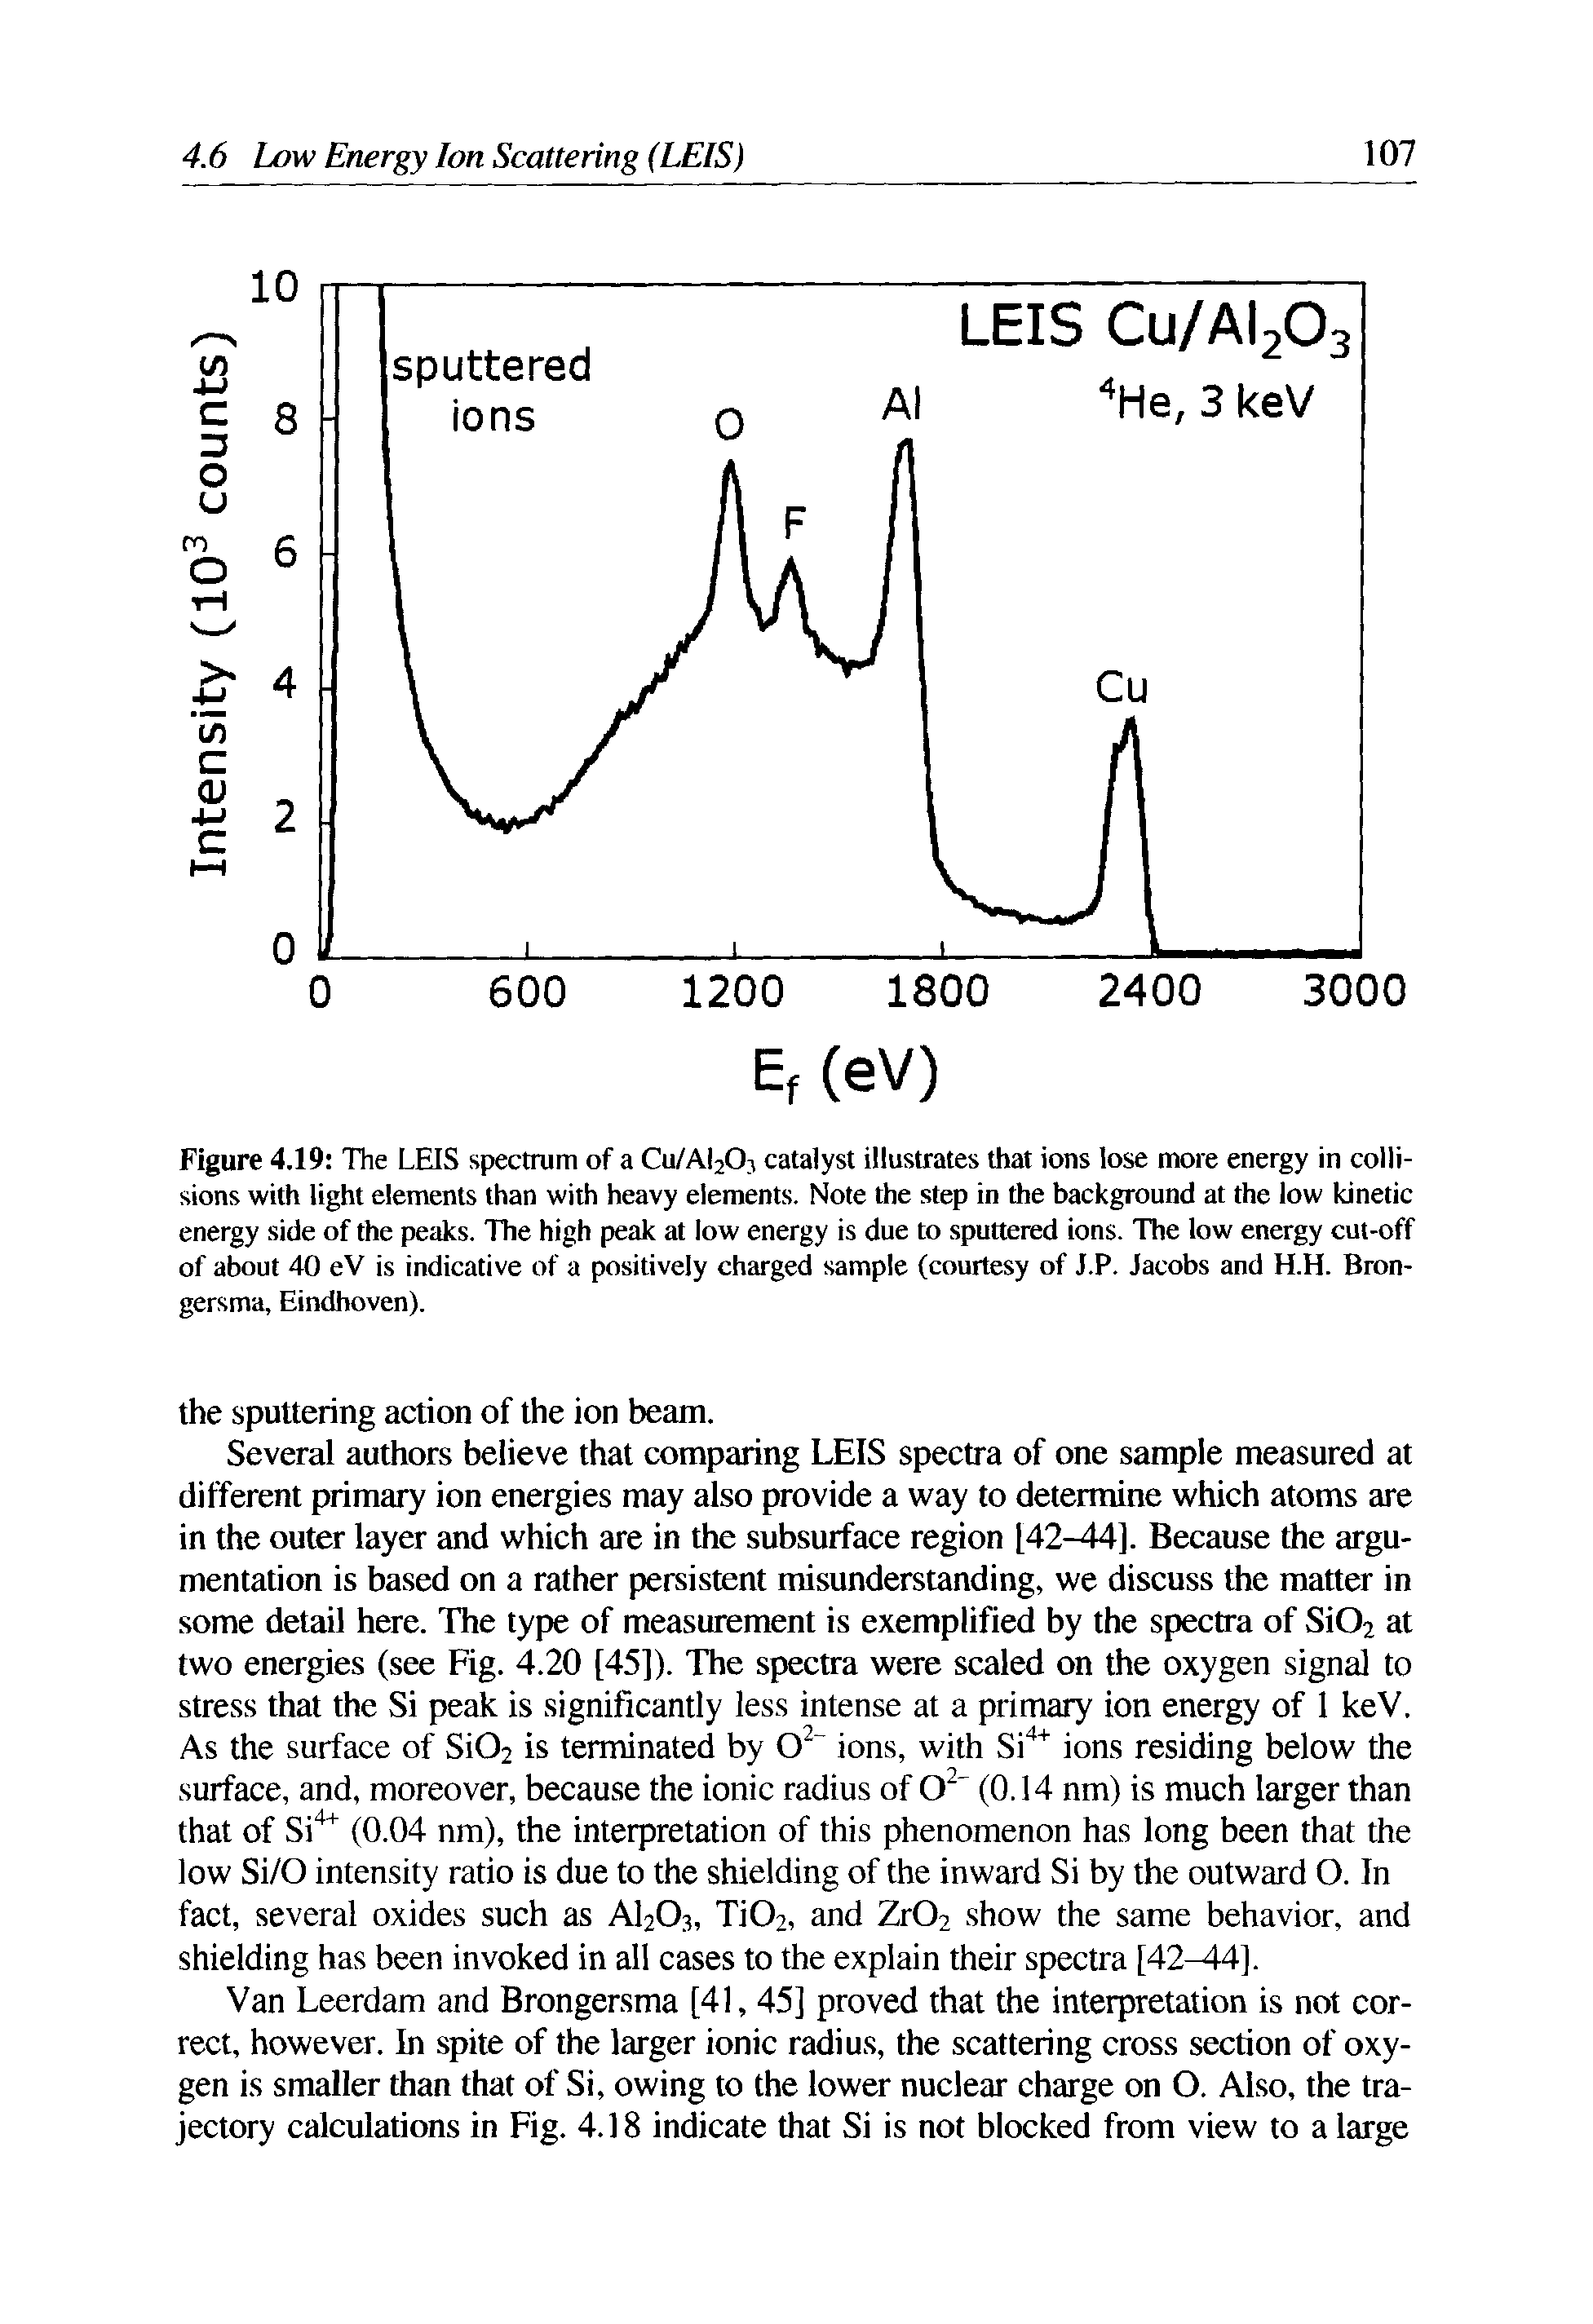 Figure 4.19 The LEIS spectrum of a Cu/Al203 catalyst illustrates that ions lose more energy in collisions with light elements than with heavy elements. Note the step in the background at the low kinetic energy side of the peaks. The high peak at low energy is due to sputtered ions. The low energy cut-off of about 40 eV is indicative of a positively charged sample (courtesy of J.P. Jacobs and H.H. Bron-gersma, Eindhoven).